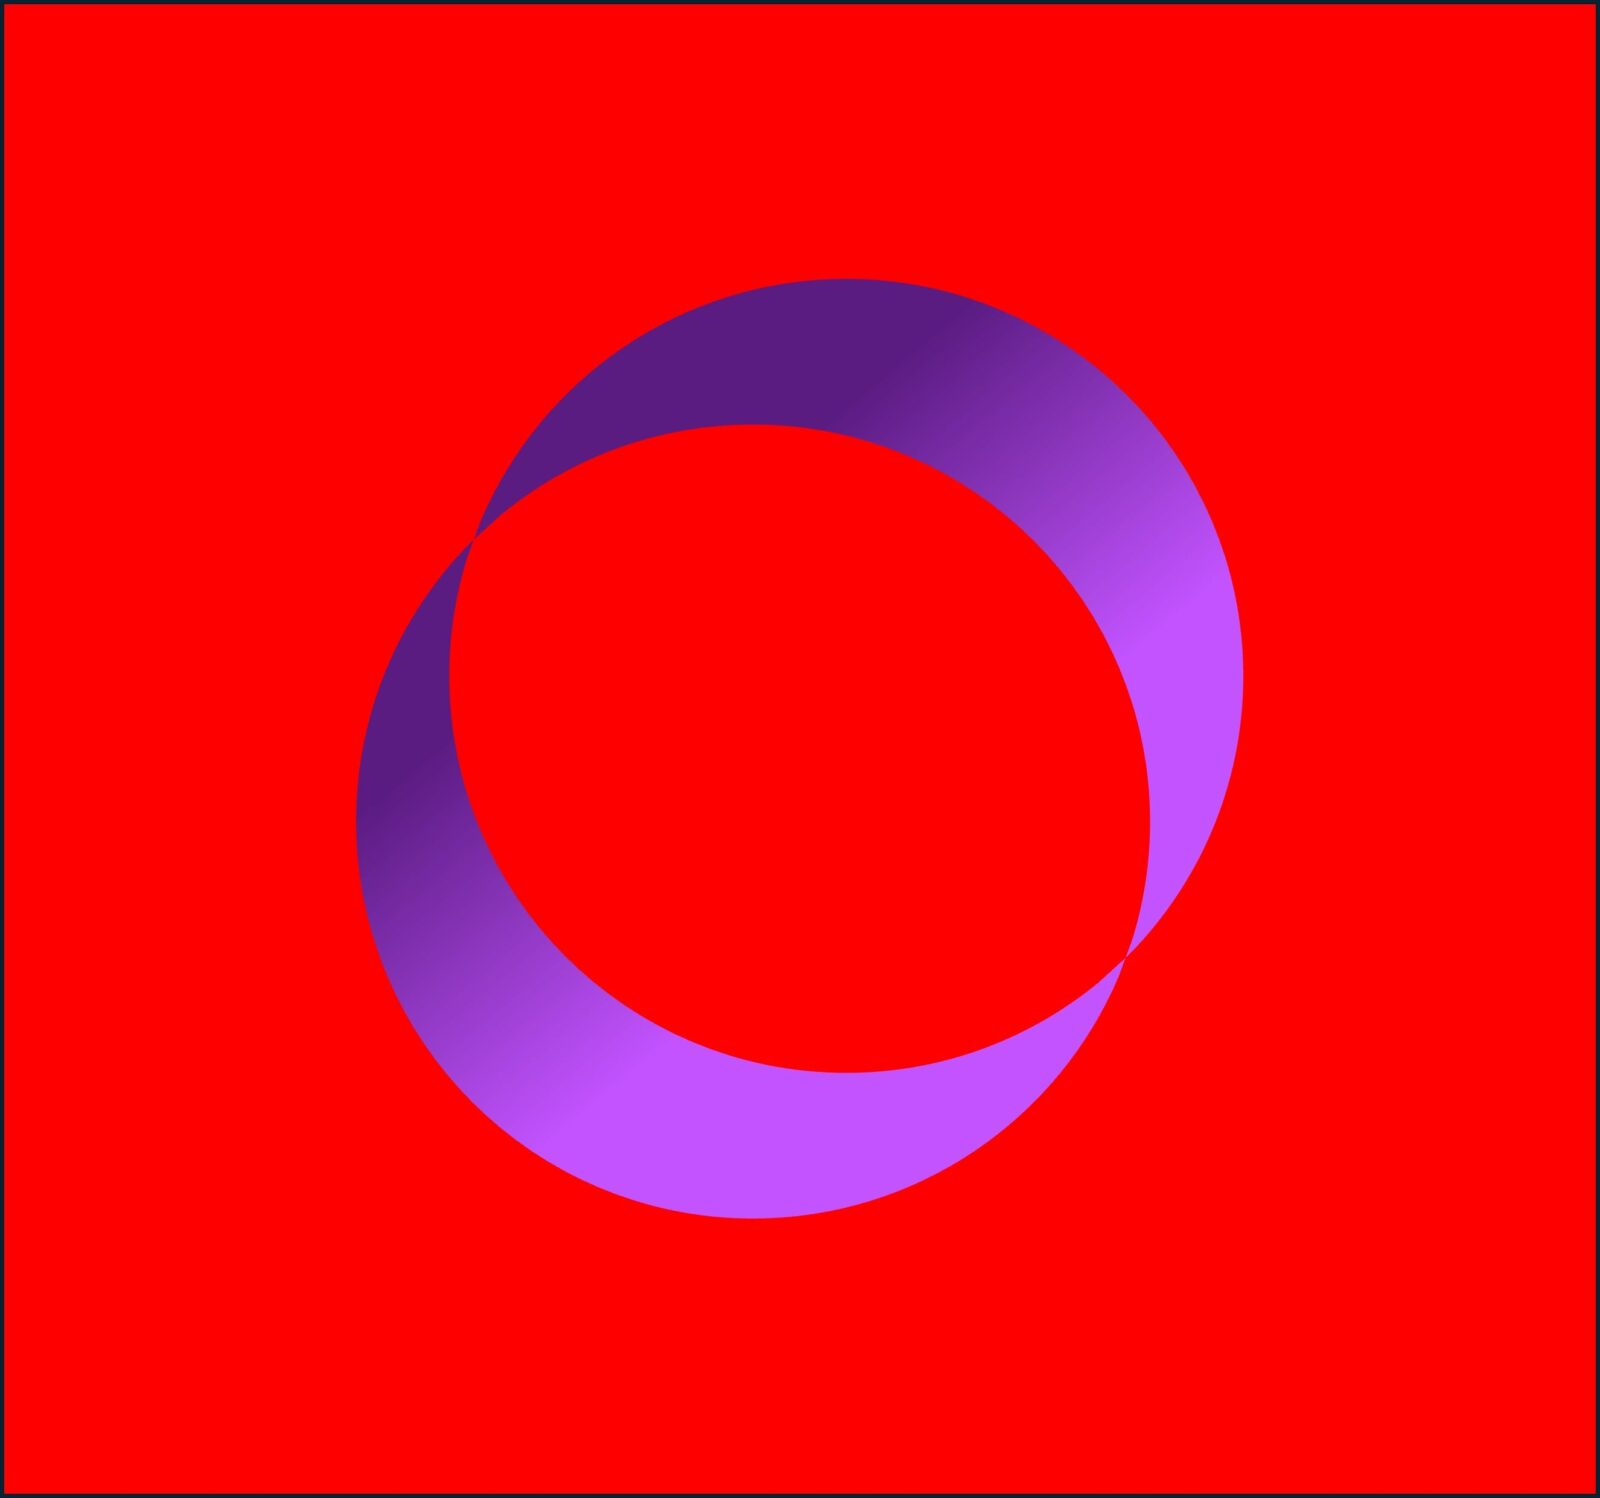 two purple cresents facing each other against a red background